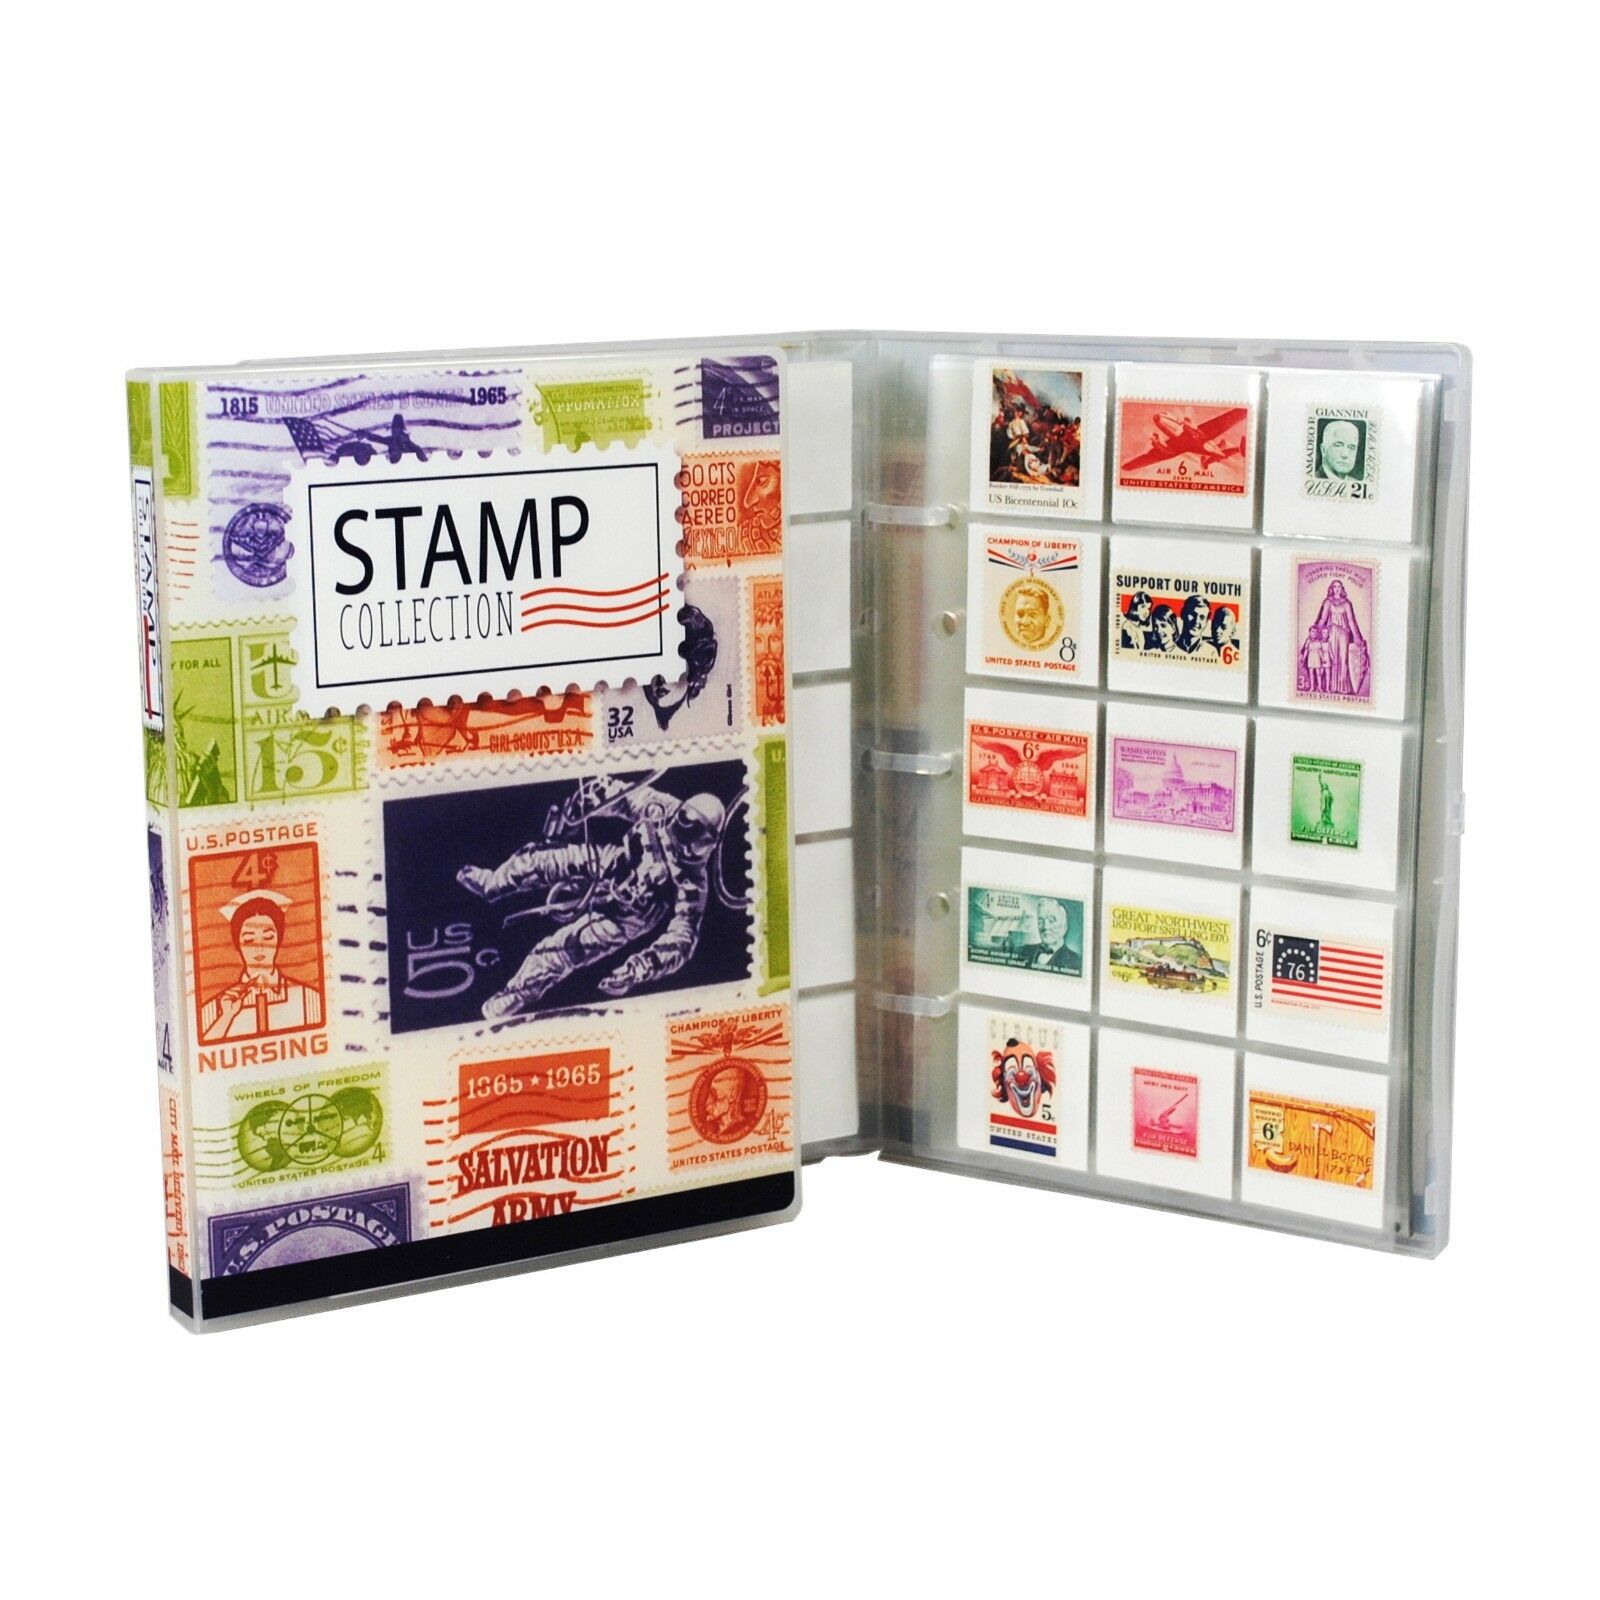 Stamp Collection Kit/album, W/ 10 Pages, Holds 150-300 Stamps (no Stamps)